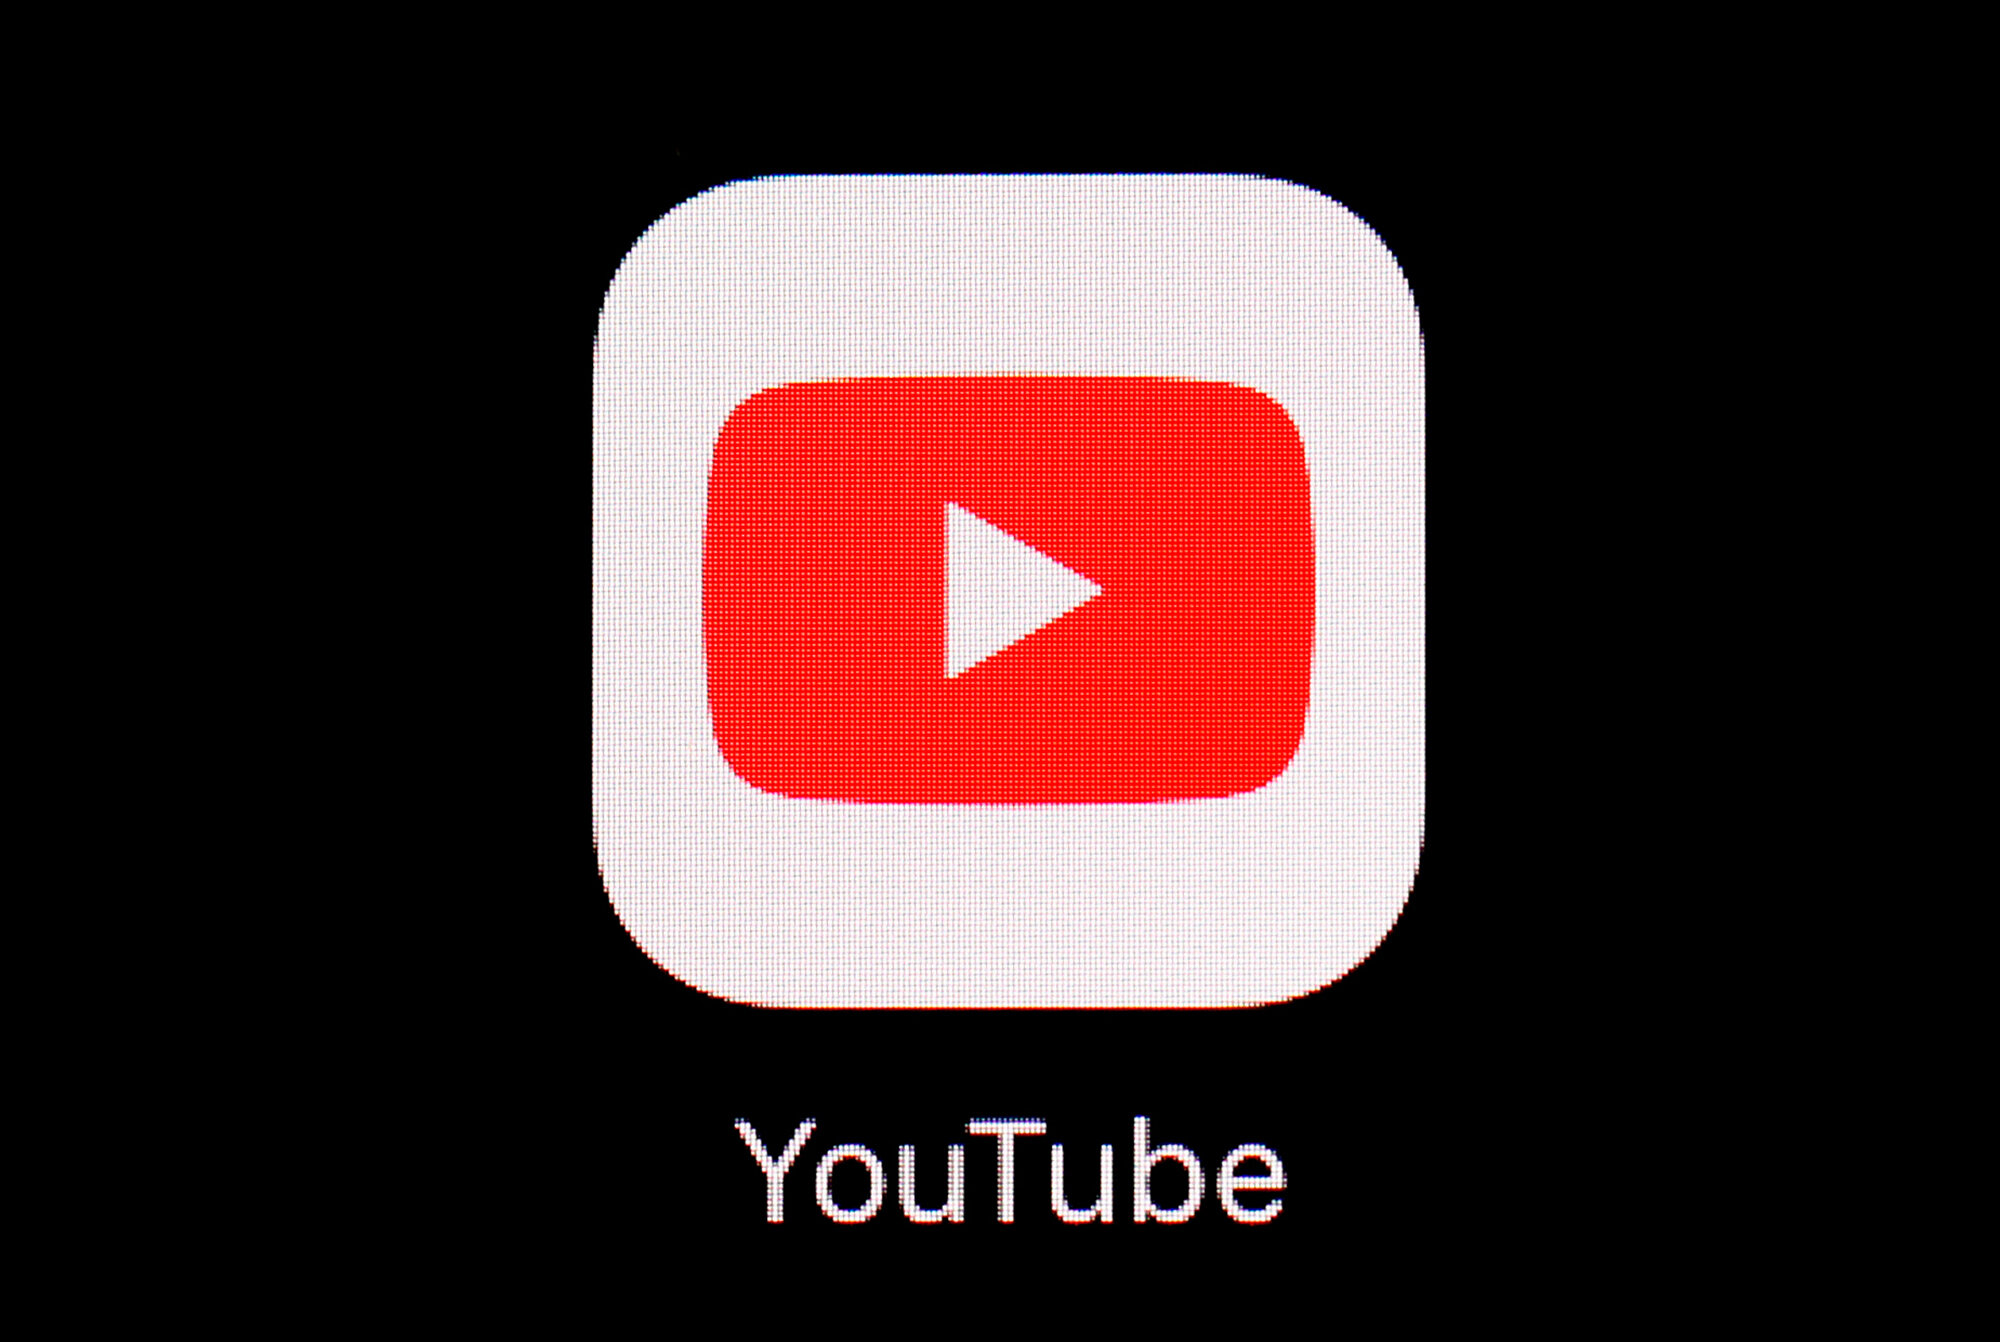 Insider Q&A: How YouTube decides what to ban